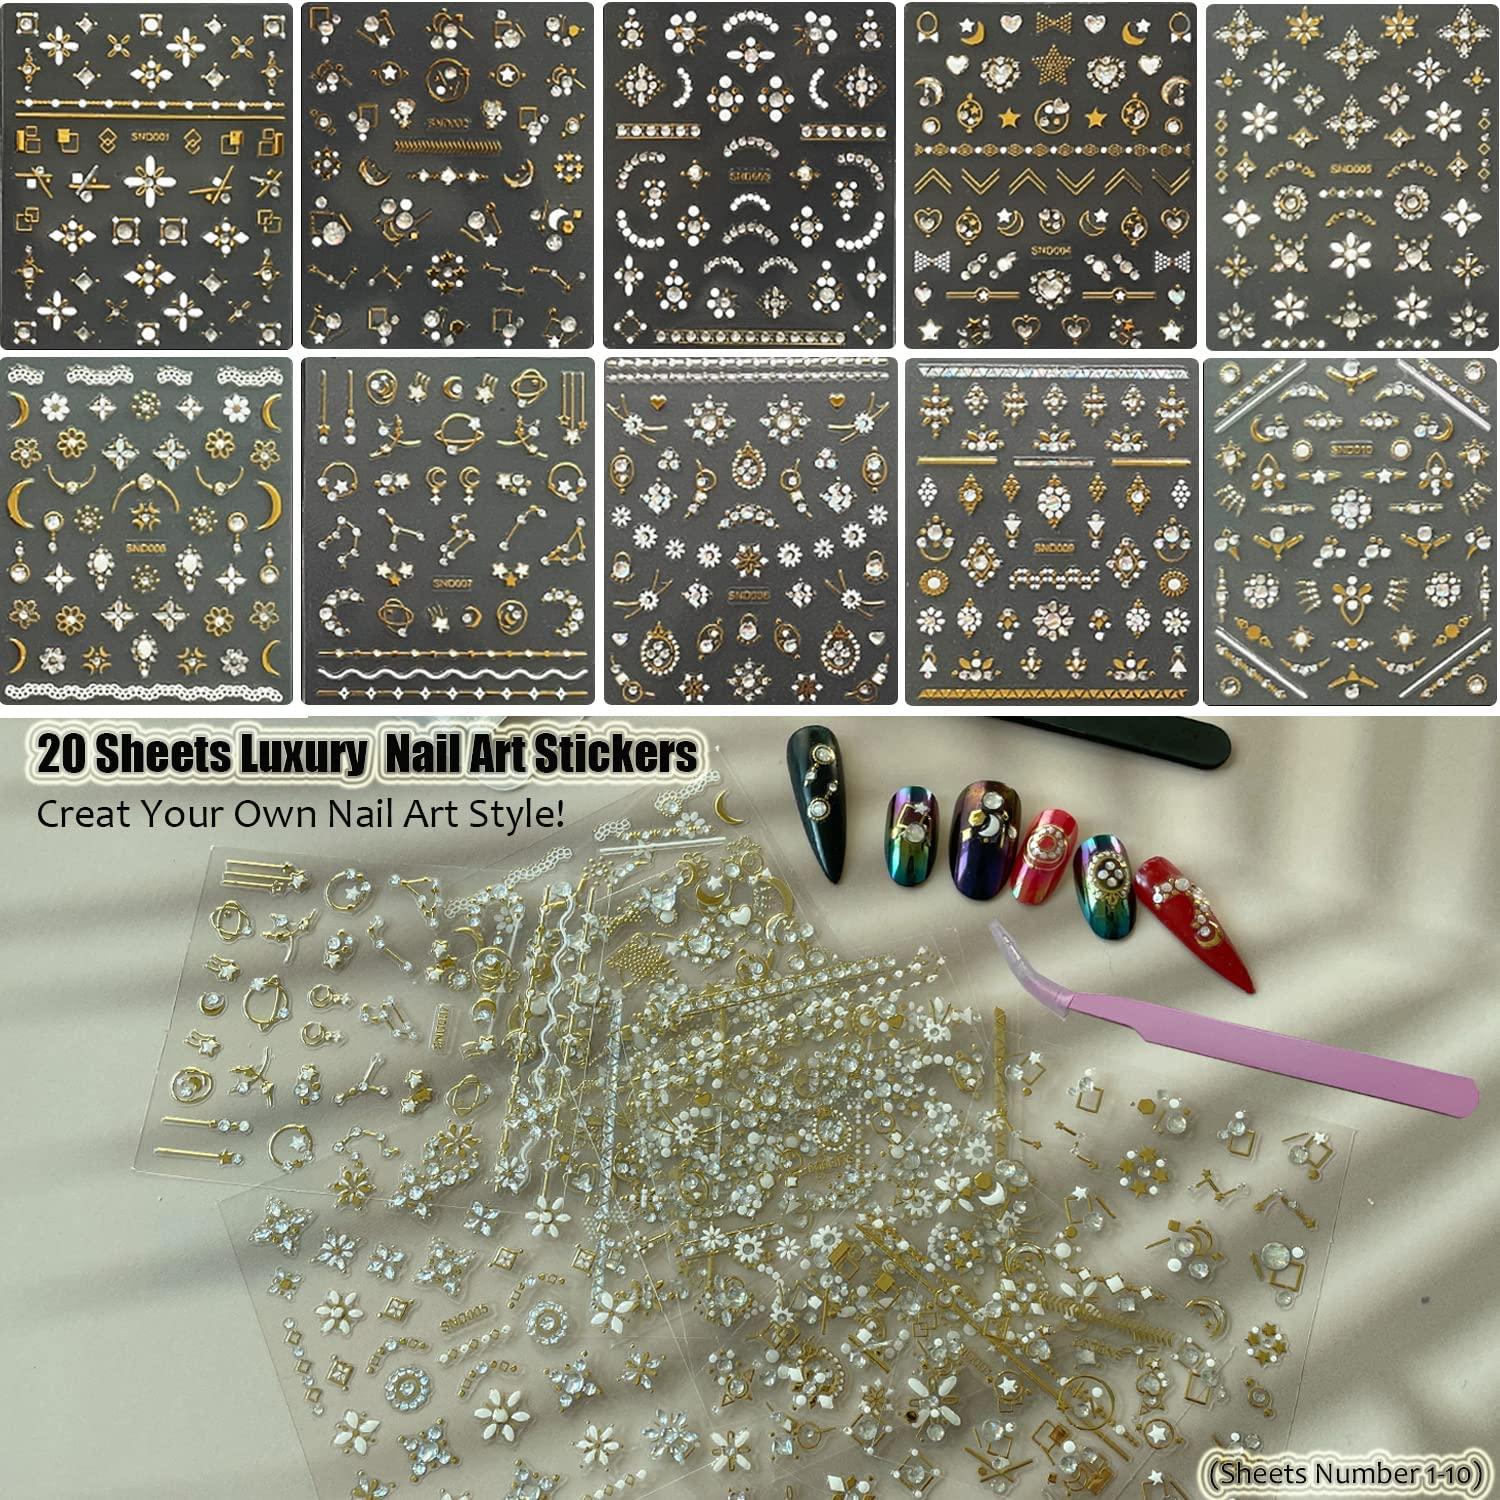 1 Lage Sheet Gold Shiny Nail Stickers Luxury Nail Salon Design Chic 3D Nail  Art Stickers Decals Self…See more 1 Lage Sheet Gold Shiny Nail Stickers